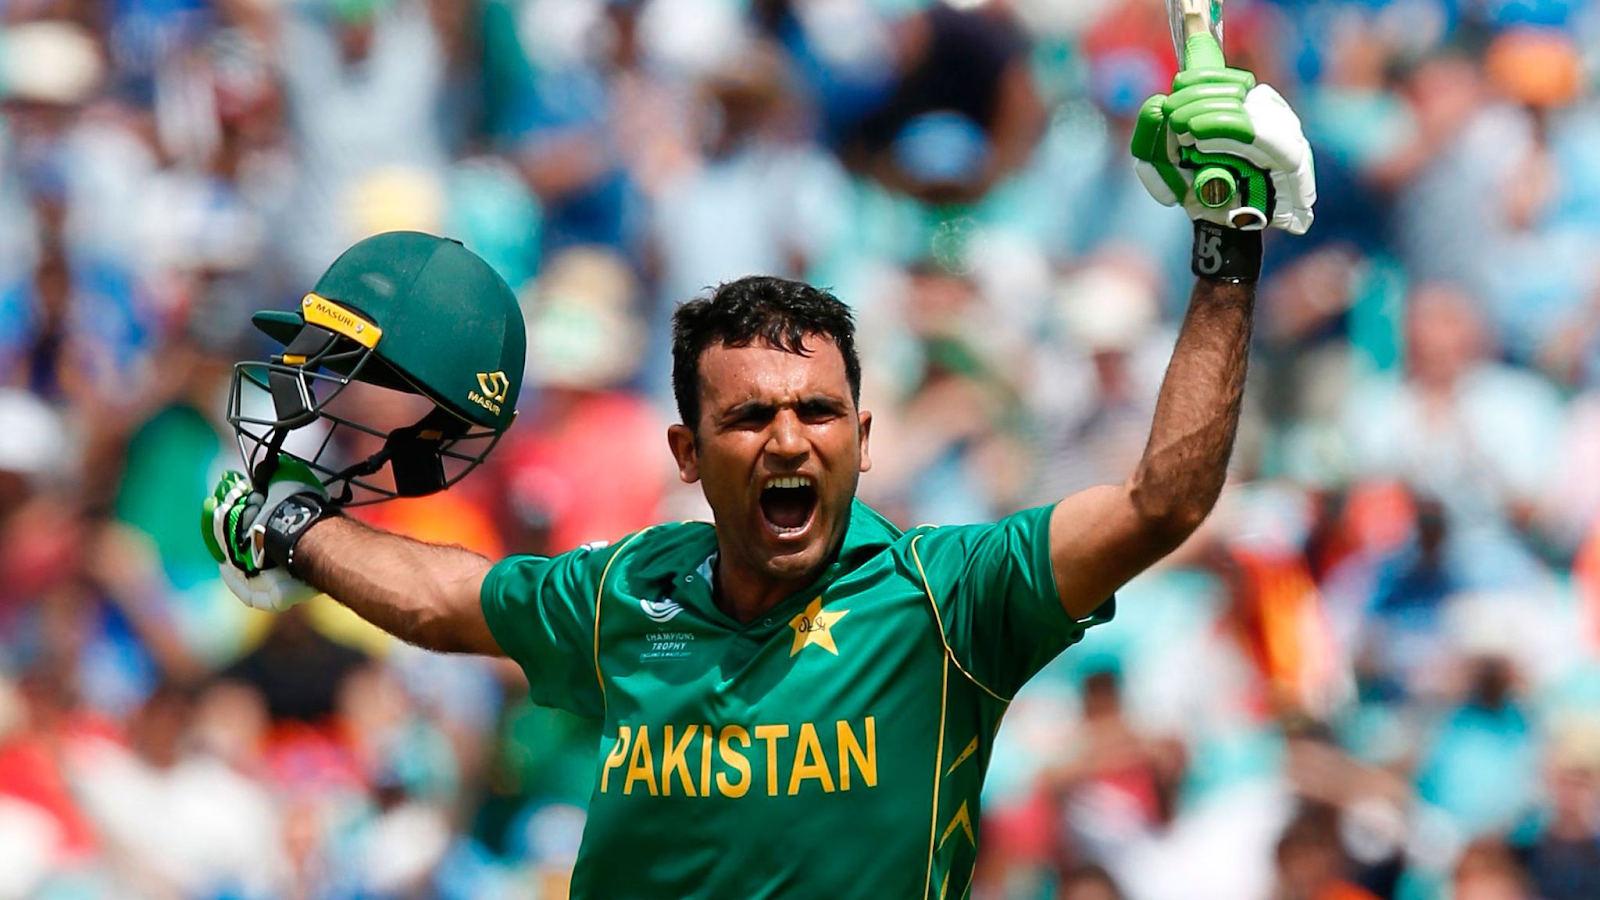 Fakhar ODI Cricket career and achievements